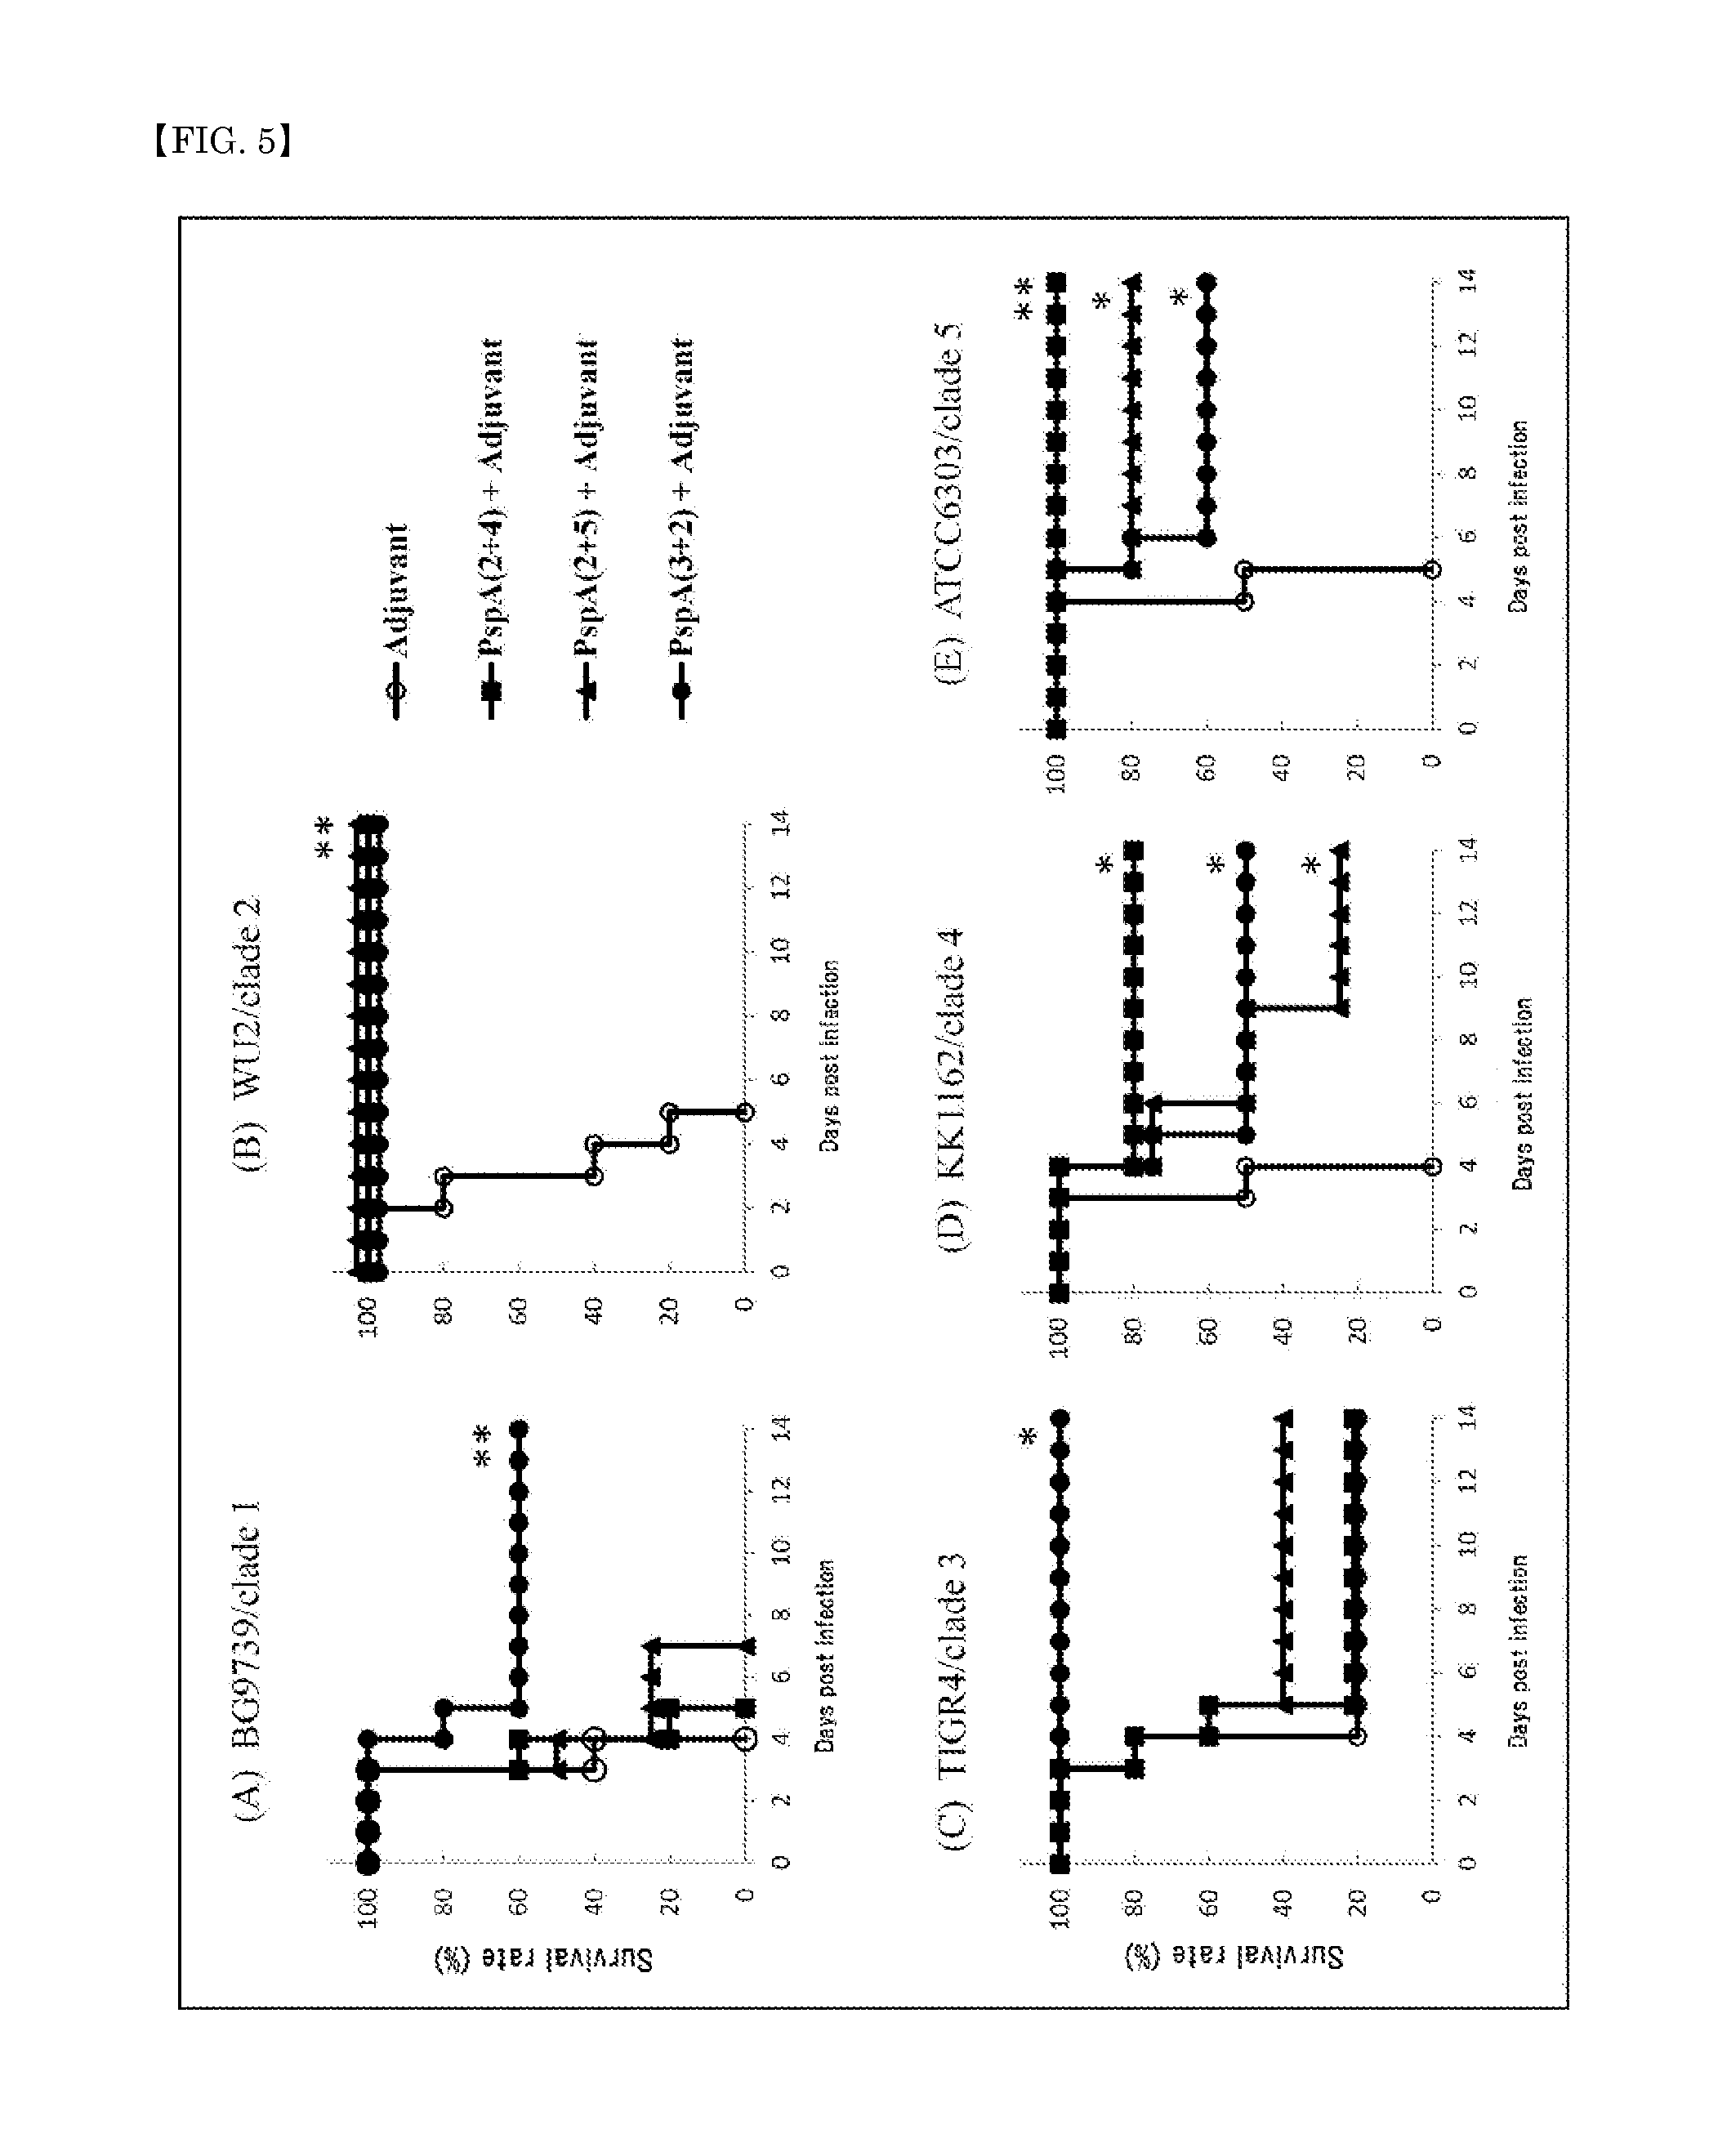 Pneumococcal vaccine containing pneumococcal surface protein a